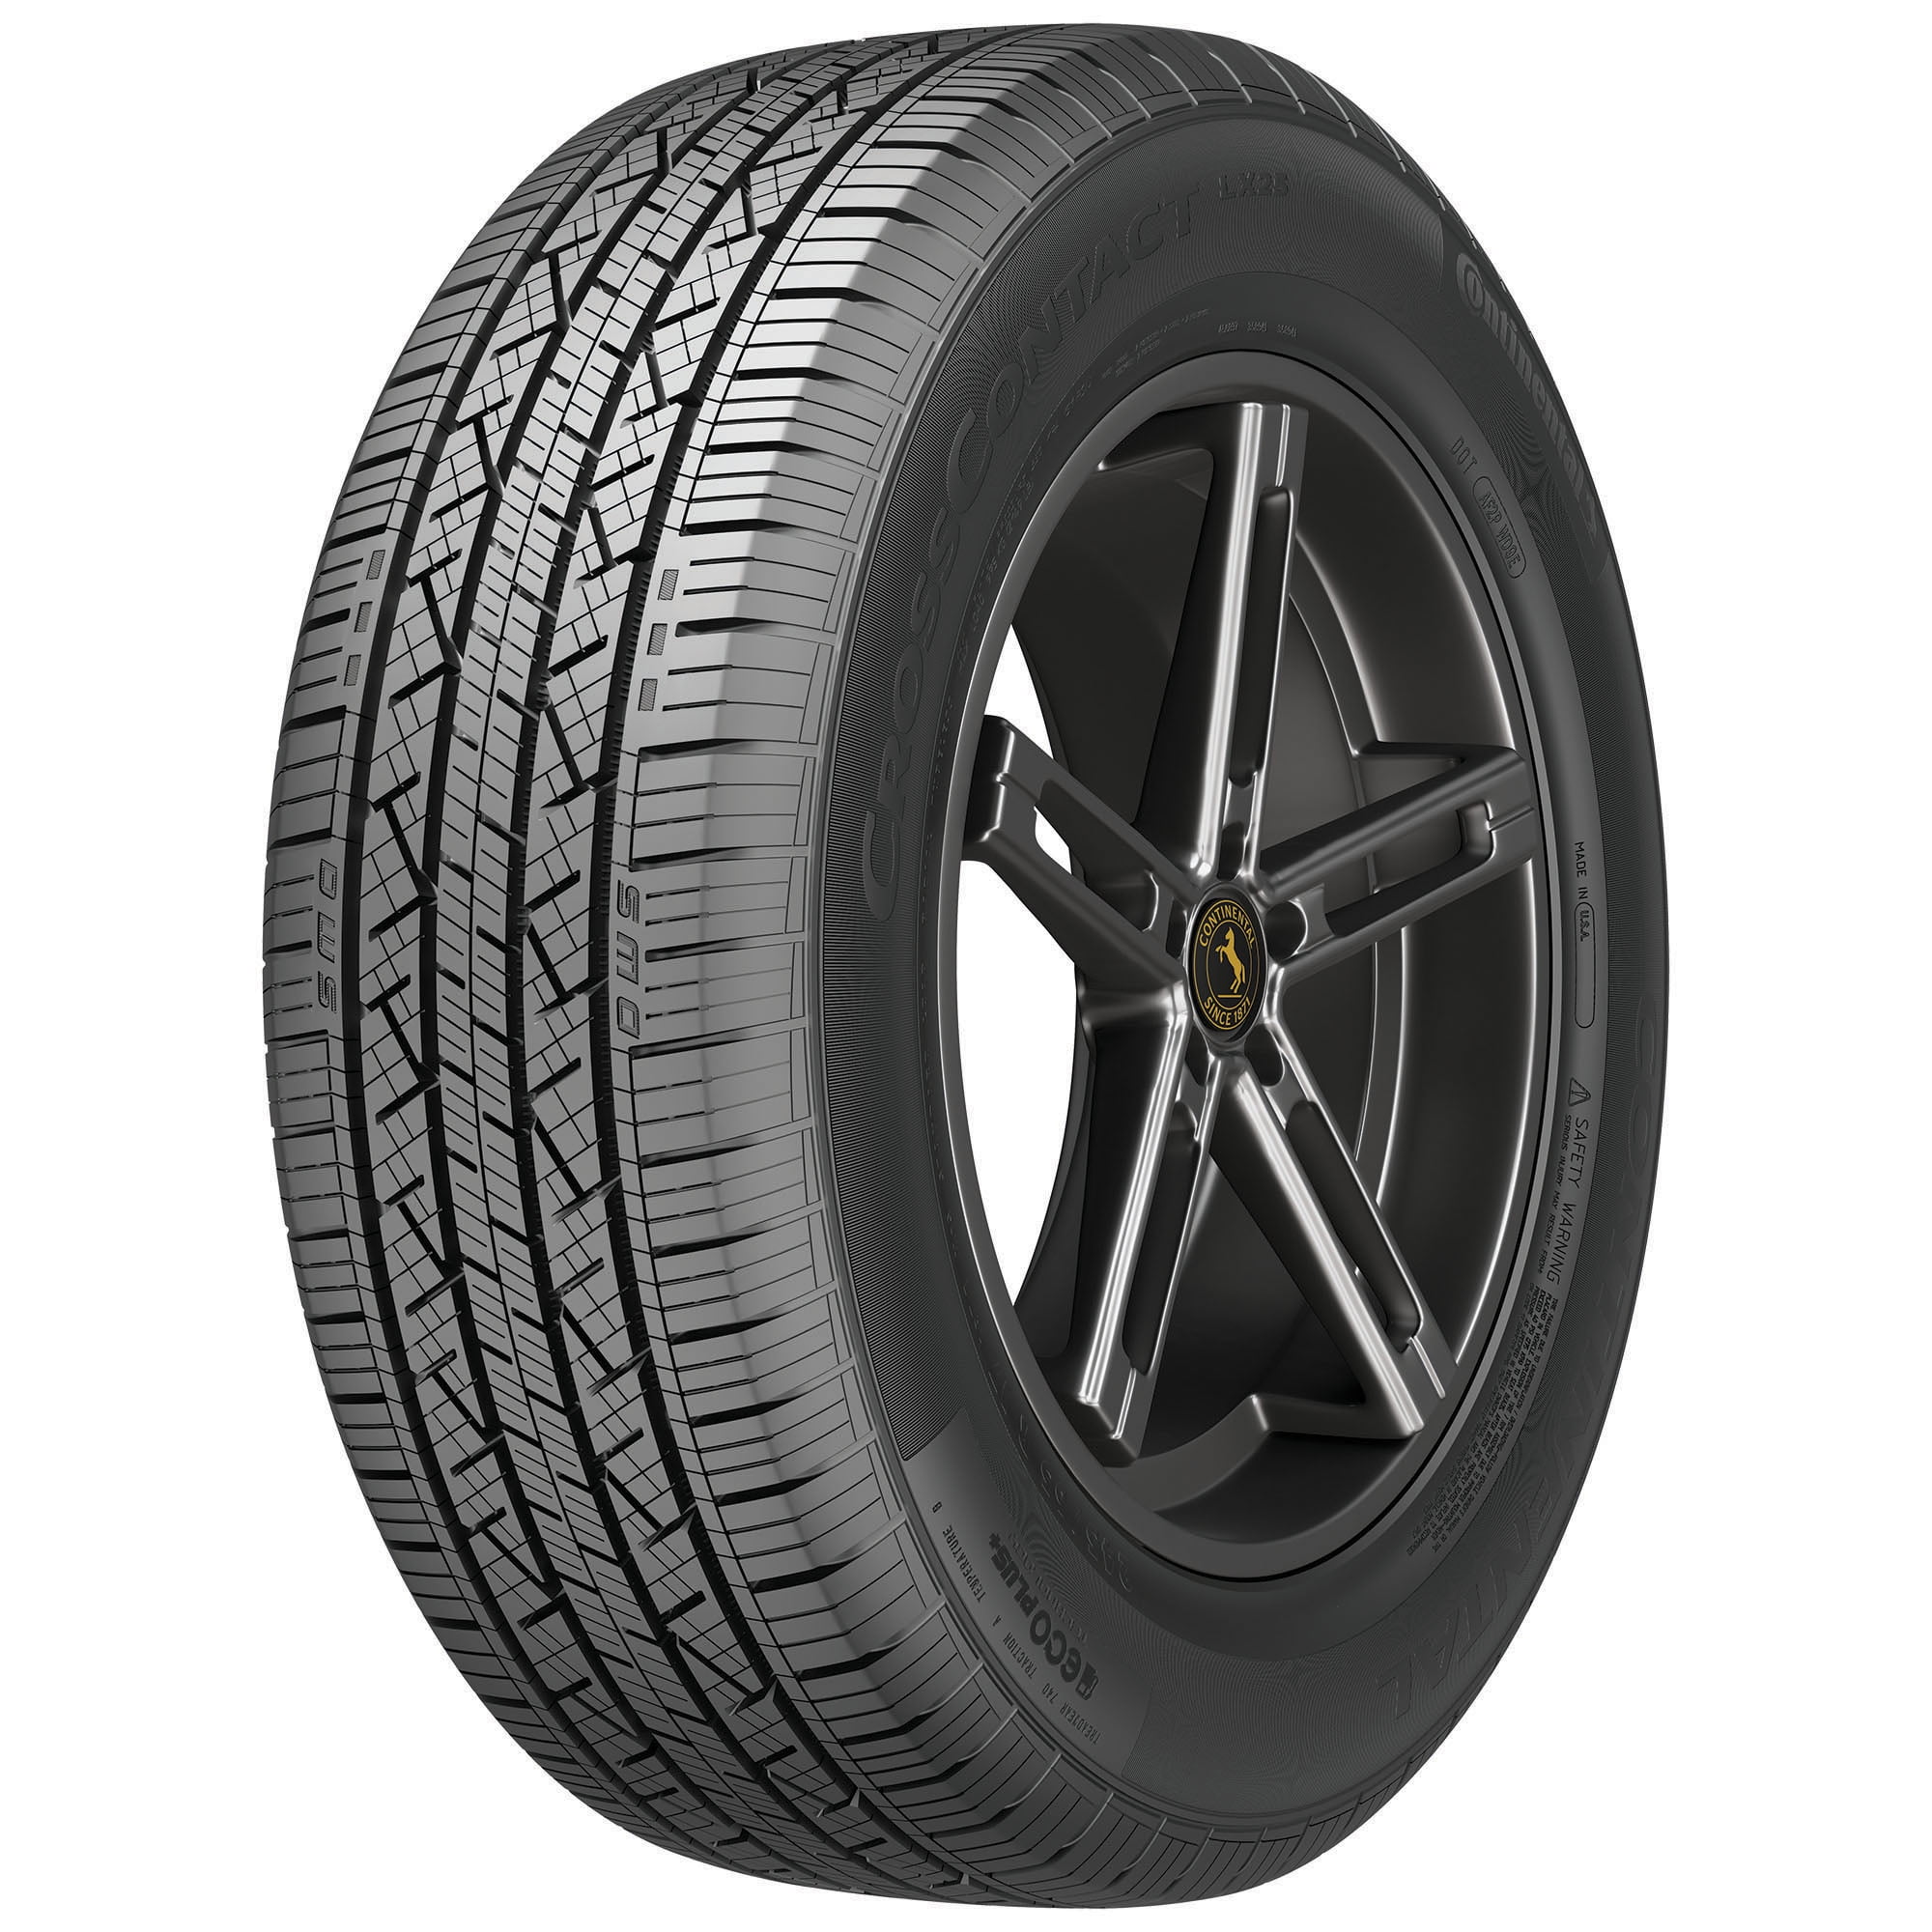 Continental CrossContact LX25 All Season 225/65R17 102T SUV/Crossover Tire